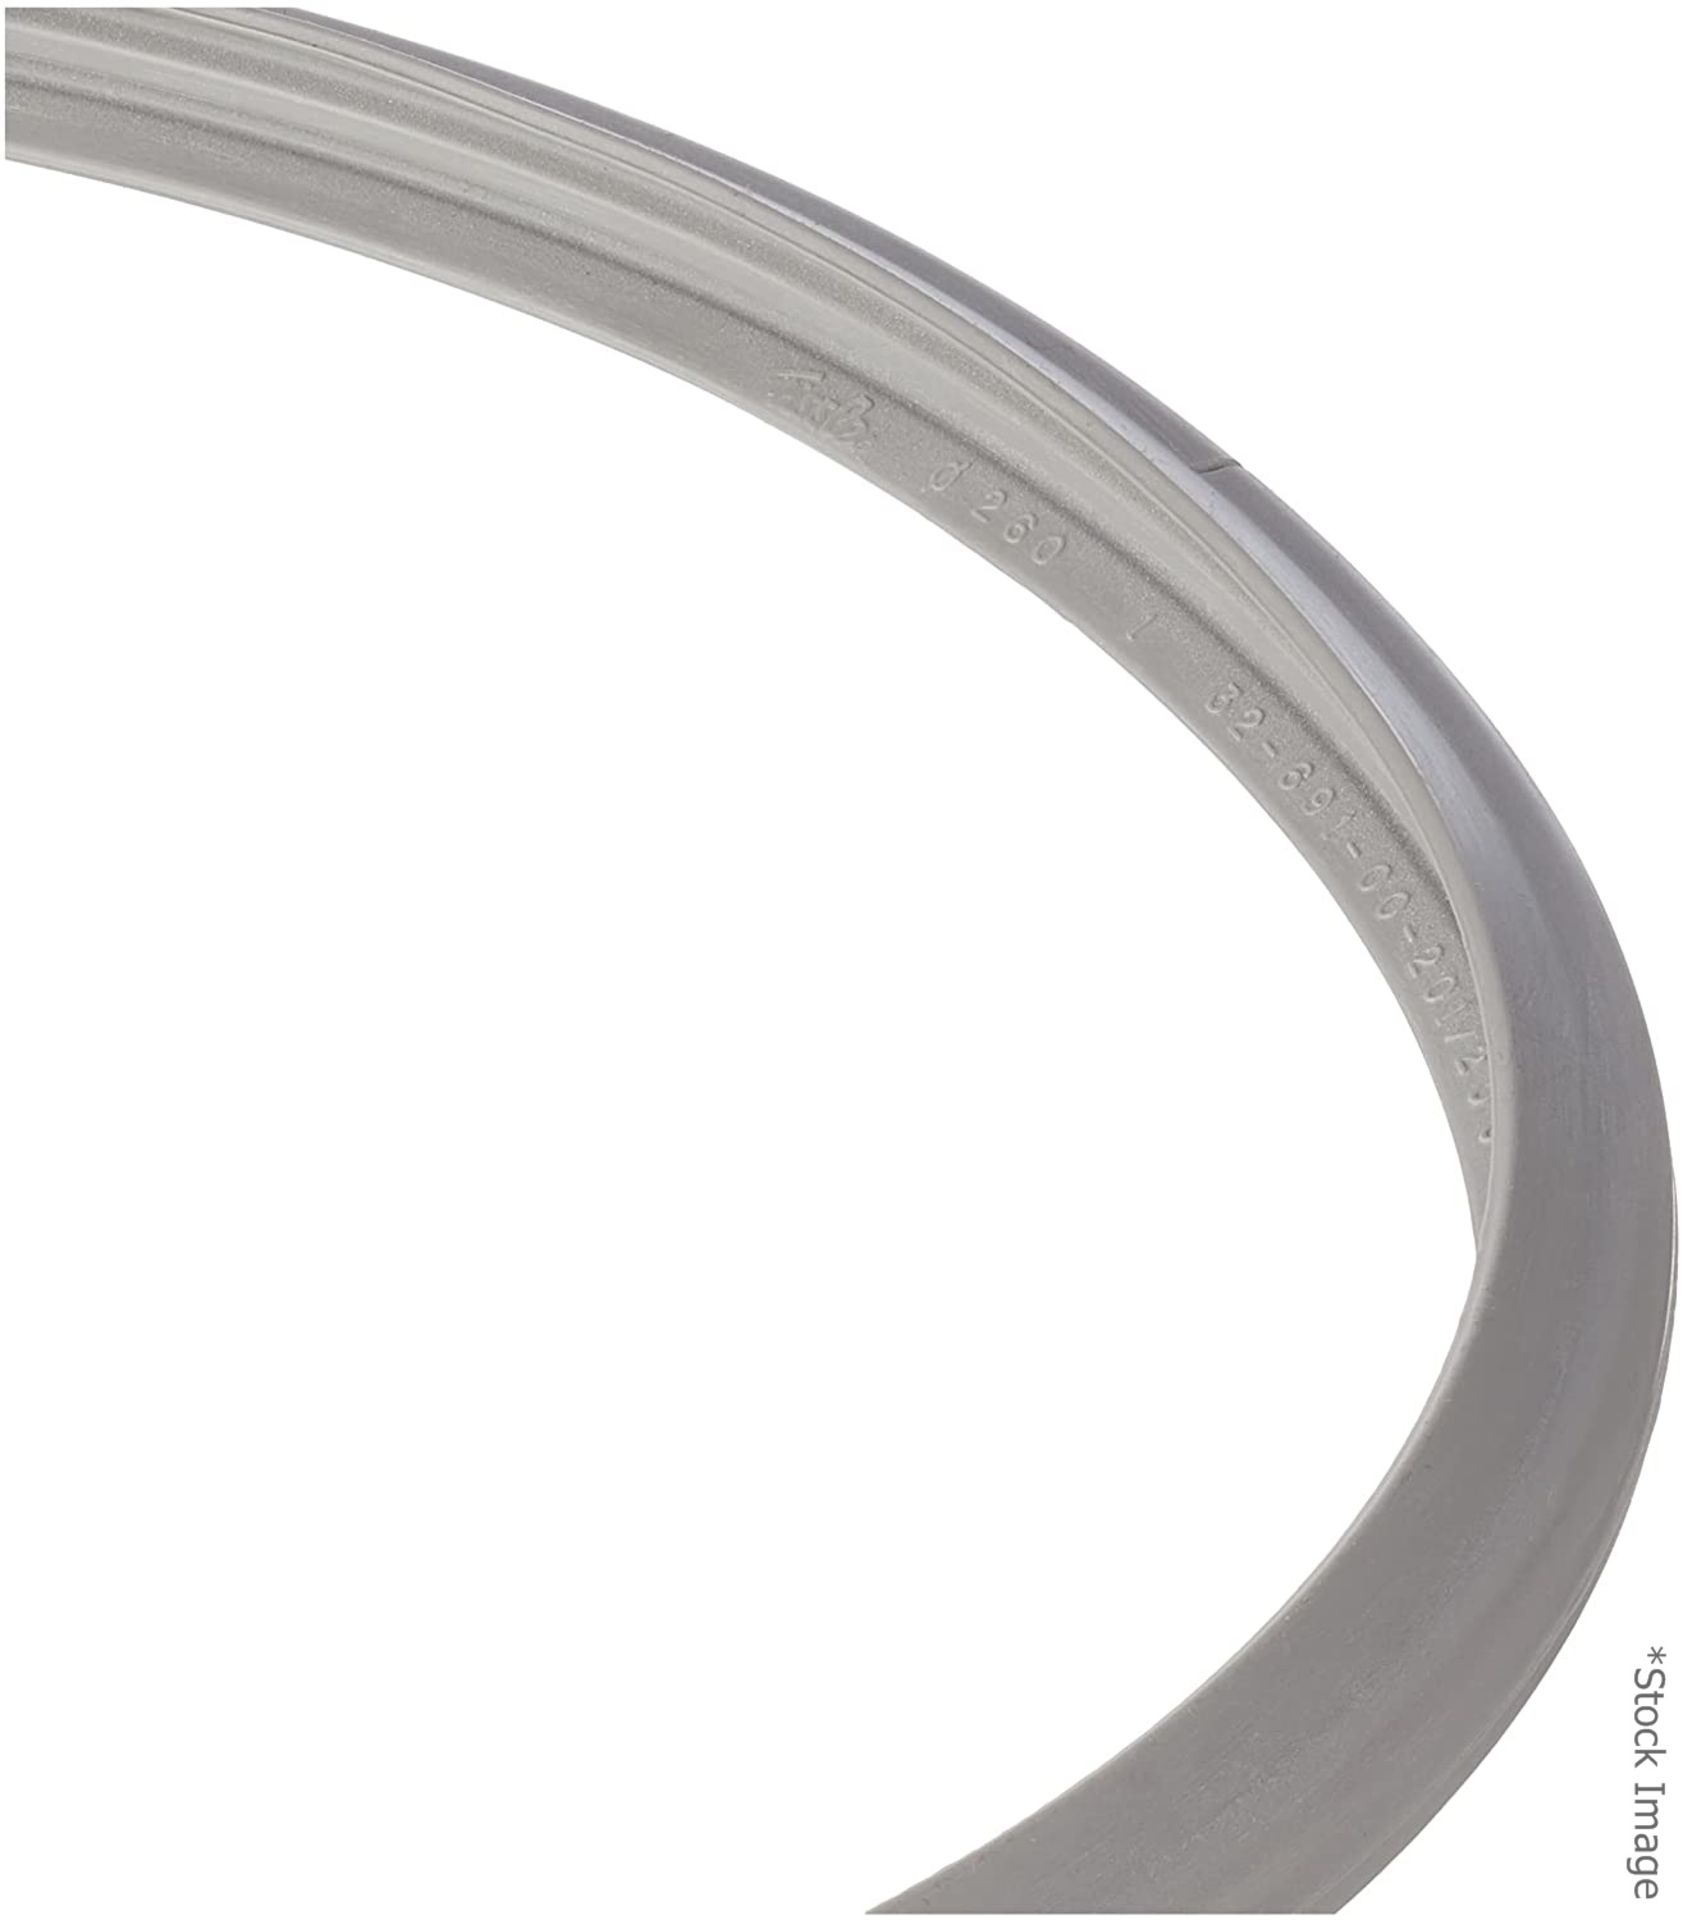 2 x Genuine FISSLER 26cm Sealing Rings for Pressure Cooker - £1 Start, No Reserve - RRP £65.98 - Image 6 of 6